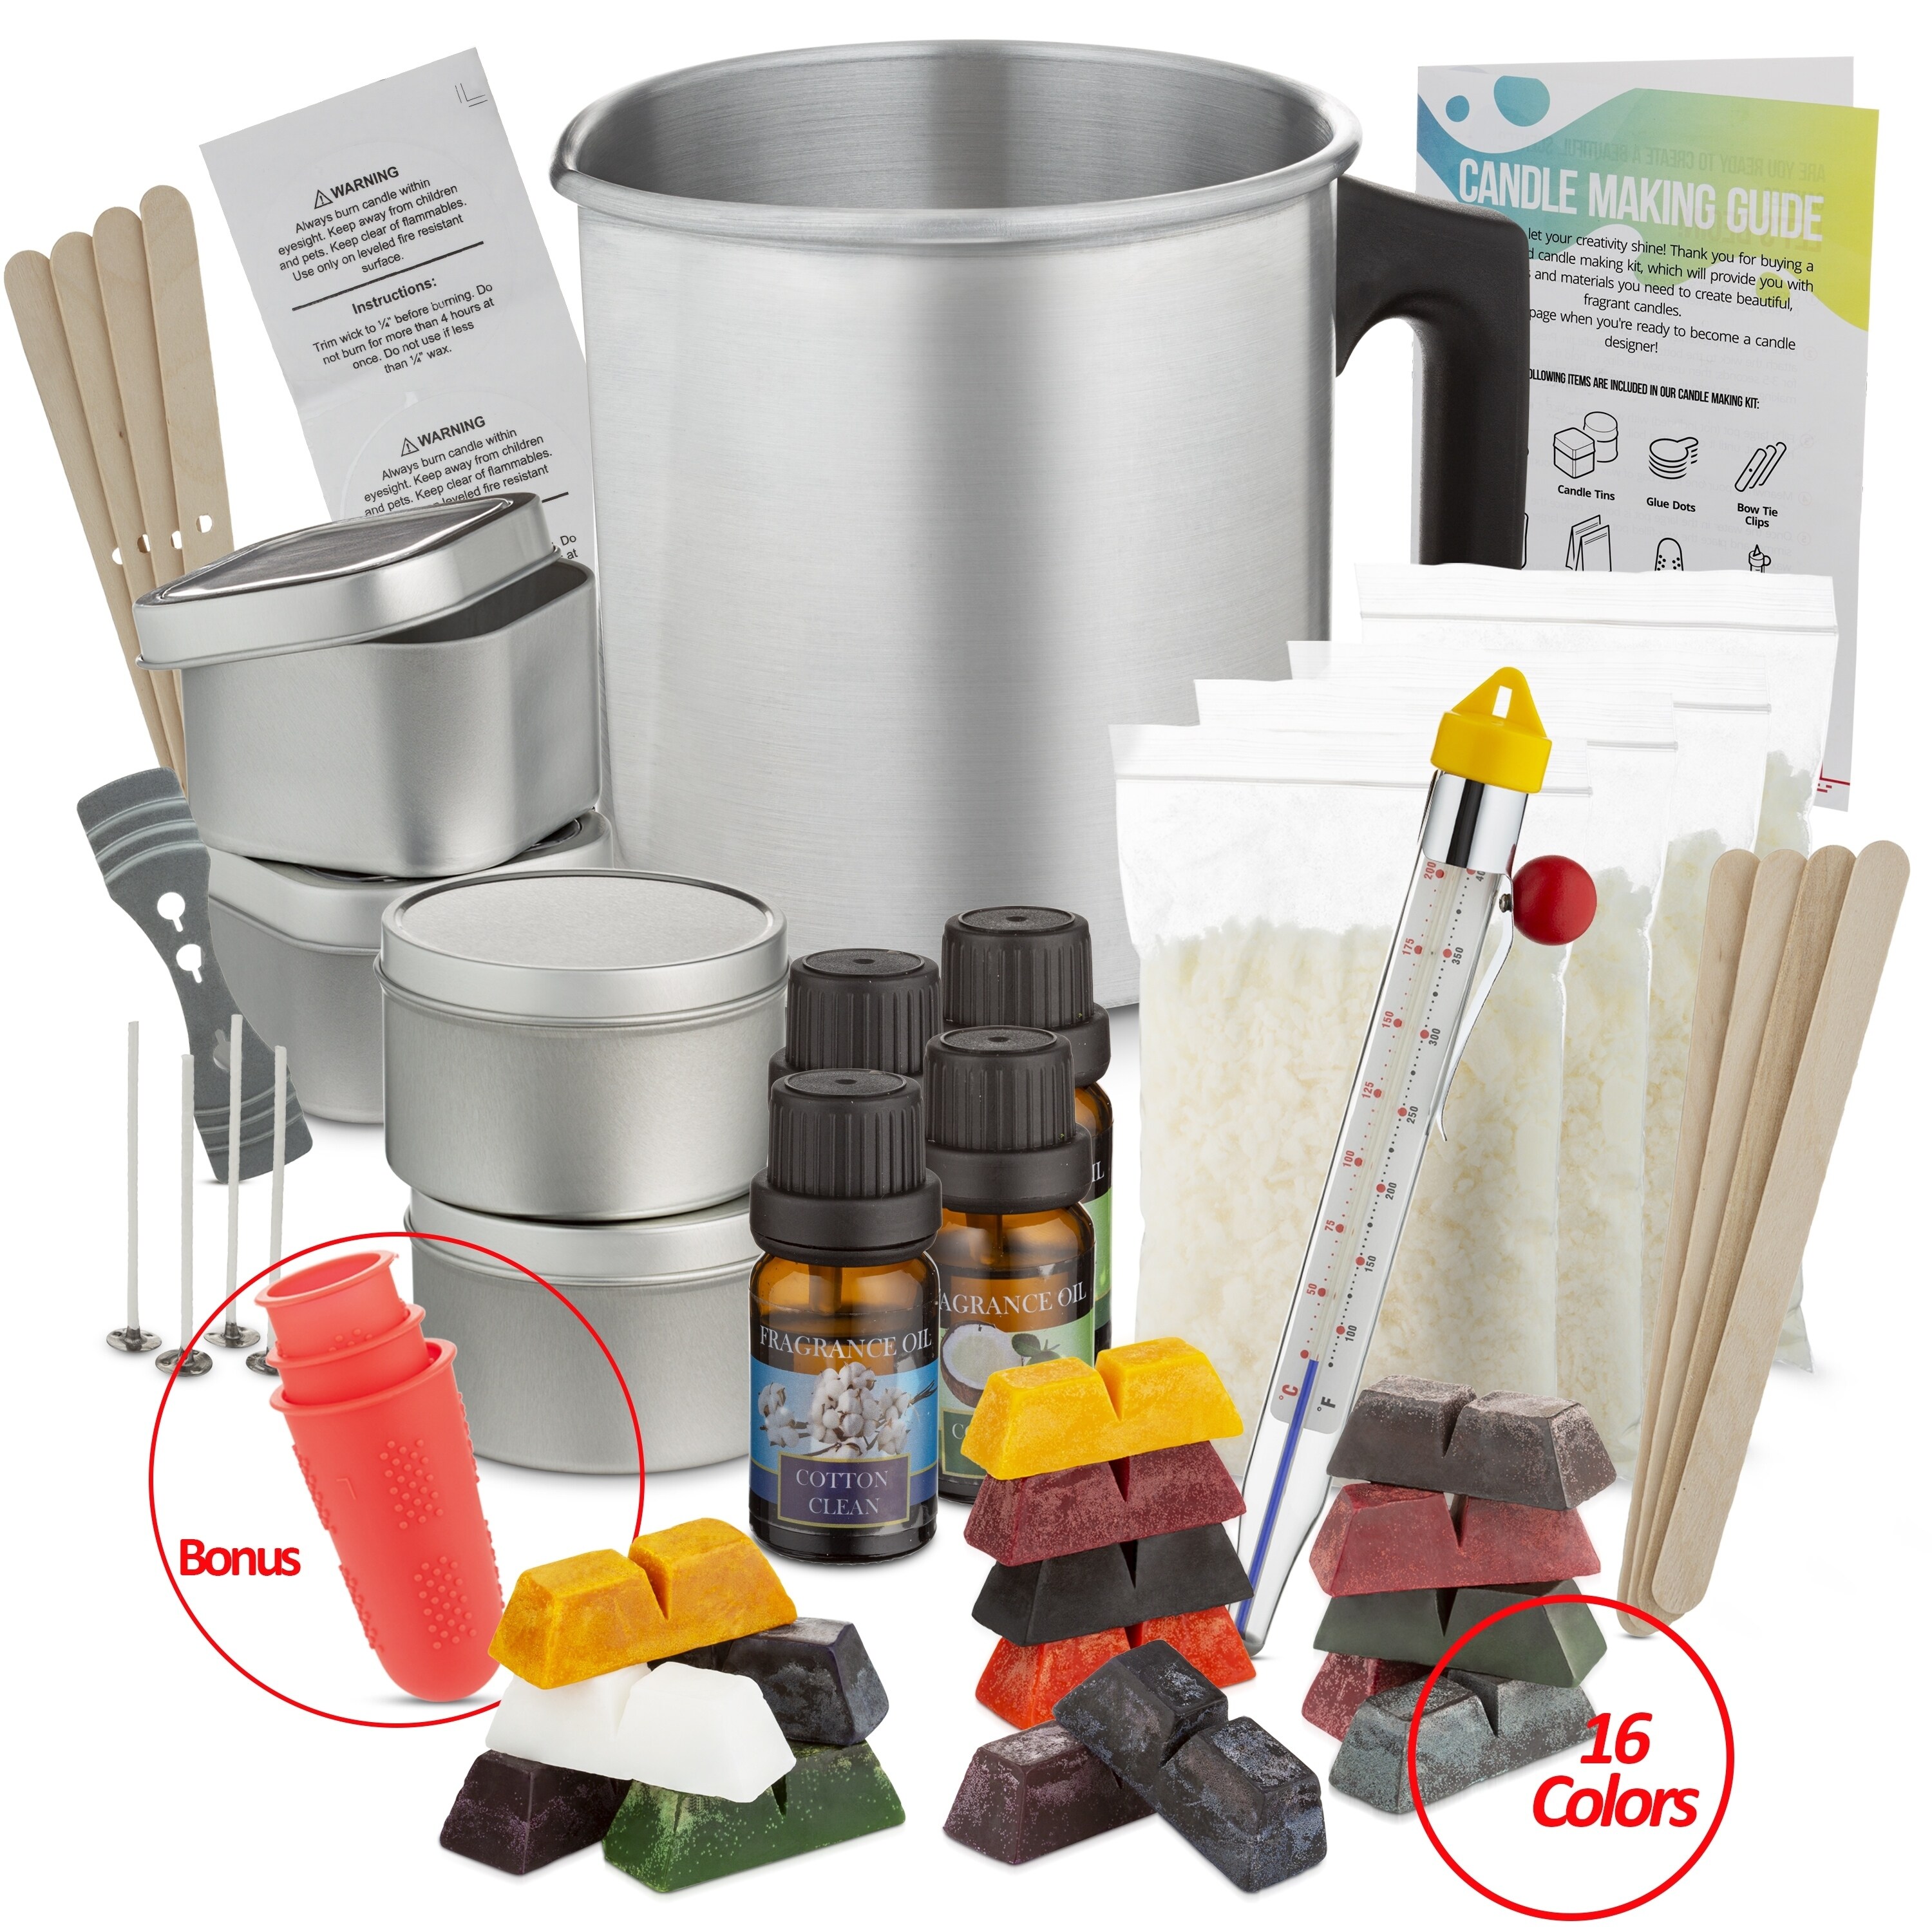 discount candle making supplies